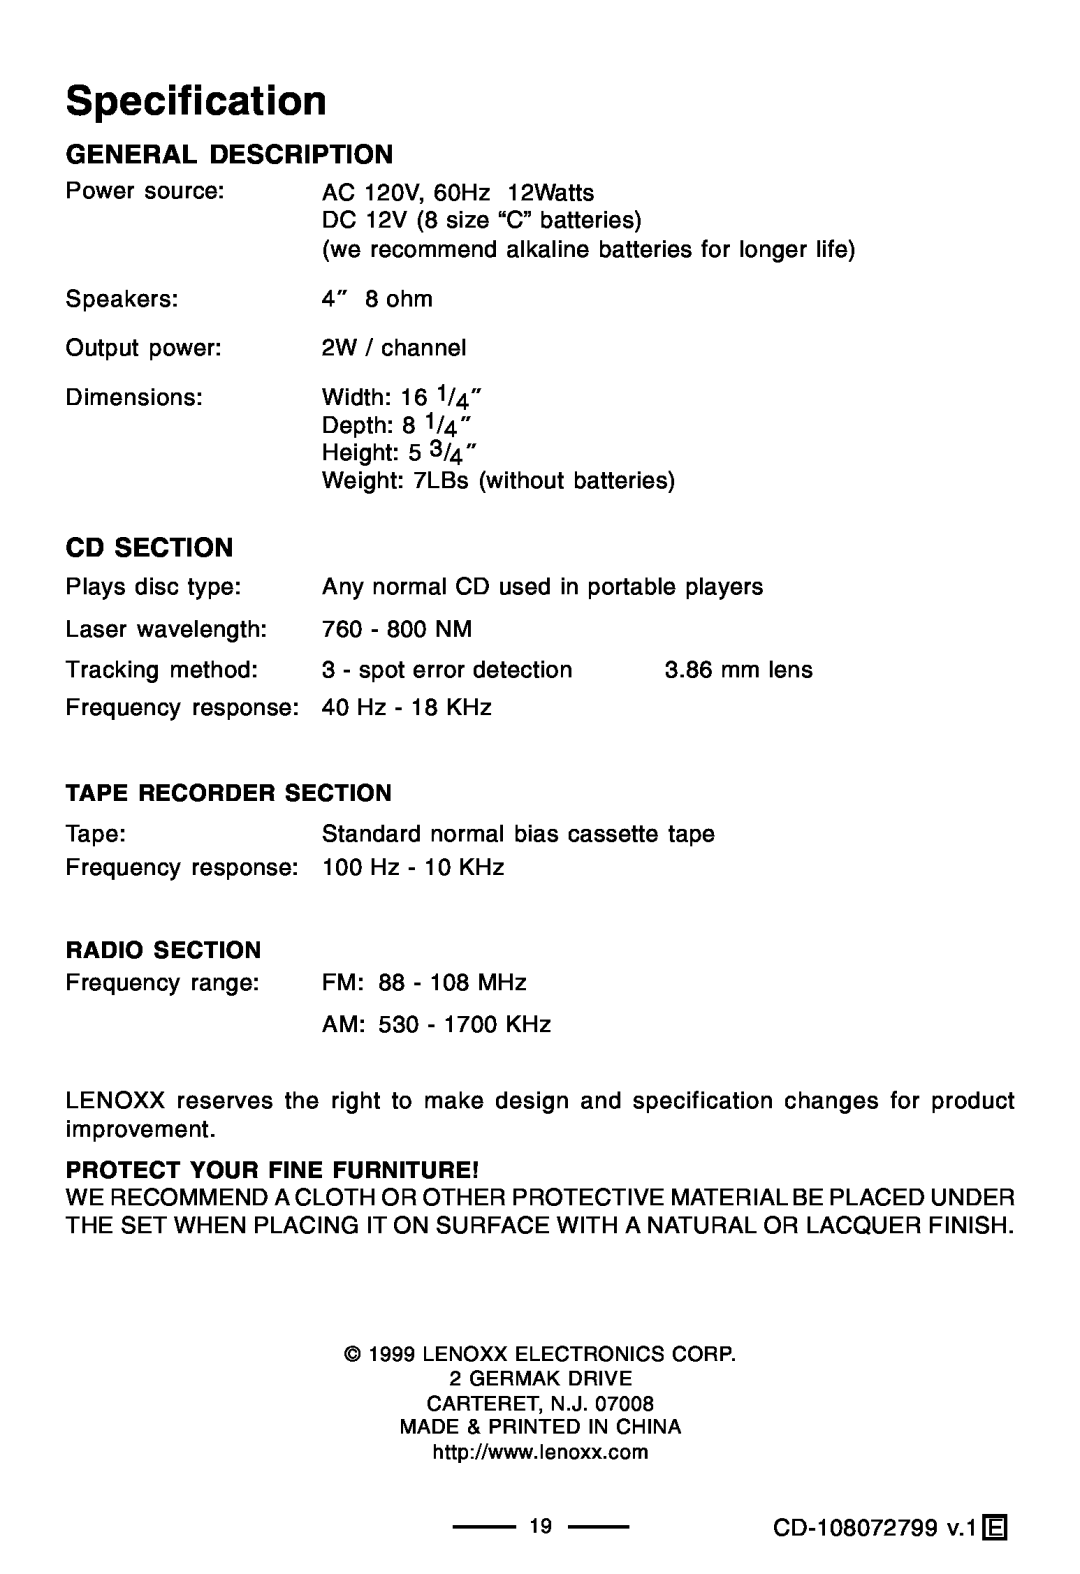 Lenoxx Electronics CD-108 operating instructions Specification, General Description, Cd Section 